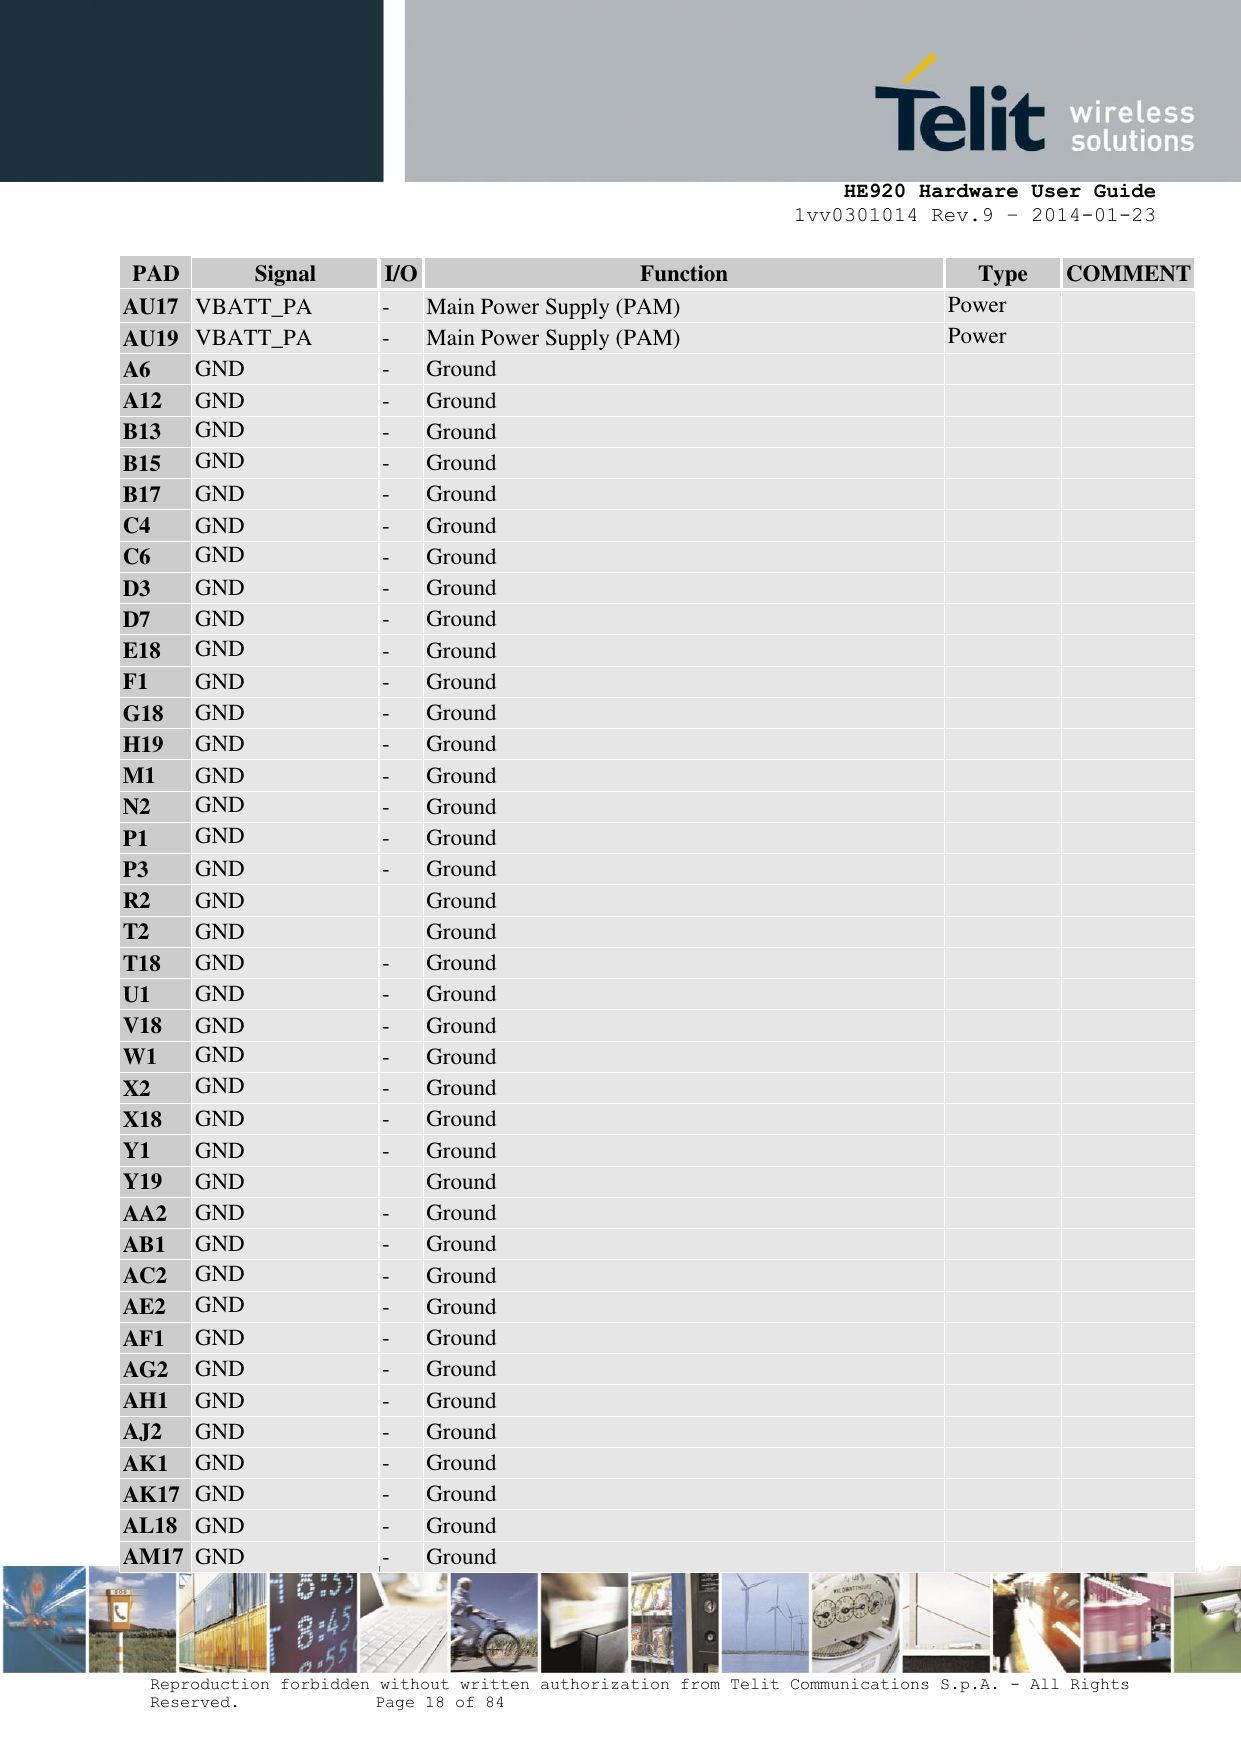     HE920 Hardware User Guide 1vv0301014 Rev.9 – 2014-01-23 Reproduction forbidden without written authorization from Telit Communications S.p.A. - All Rights Reserved.    Page 18 of 84  PAD Signal I/O Function Type COMMENT AU17 VBATT_PA - Main Power Supply (PAM) Power  AU19 VBATT_PA - Main Power Supply (PAM) Power  A6 GND - Ground   A12 GND - Ground   B13 GND - Ground   B15 GND - Ground   B17 GND - Ground   C4 GND - Ground   C6 GND - Ground   D3 GND - Ground   D7 GND - Ground   E18 GND - Ground   F1 GND - Ground   G18 GND - Ground   H19 GND - Ground   M1 GND - Ground   N2 GND - Ground   P1 GND - Ground   P3 GND - Ground   R2 GND  Ground   T2 GND  Ground   T18 GND - Ground   U1 GND - Ground   V18 GND - Ground   W1 GND - Ground   X2 GND - Ground   X18 GND - Ground   Y1 GND - Ground   Y19 GND  Ground   AA2 GND - Ground   AB1 GND - Ground   AC2 GND - Ground   AE2 GND - Ground   AF1 GND - Ground   AG2 GND - Ground   AH1 GND - Ground   AJ2 GND - Ground   AK1 GND - Ground   AK17 GND - Ground   AL18 GND - Ground   AM17 GND - Ground   